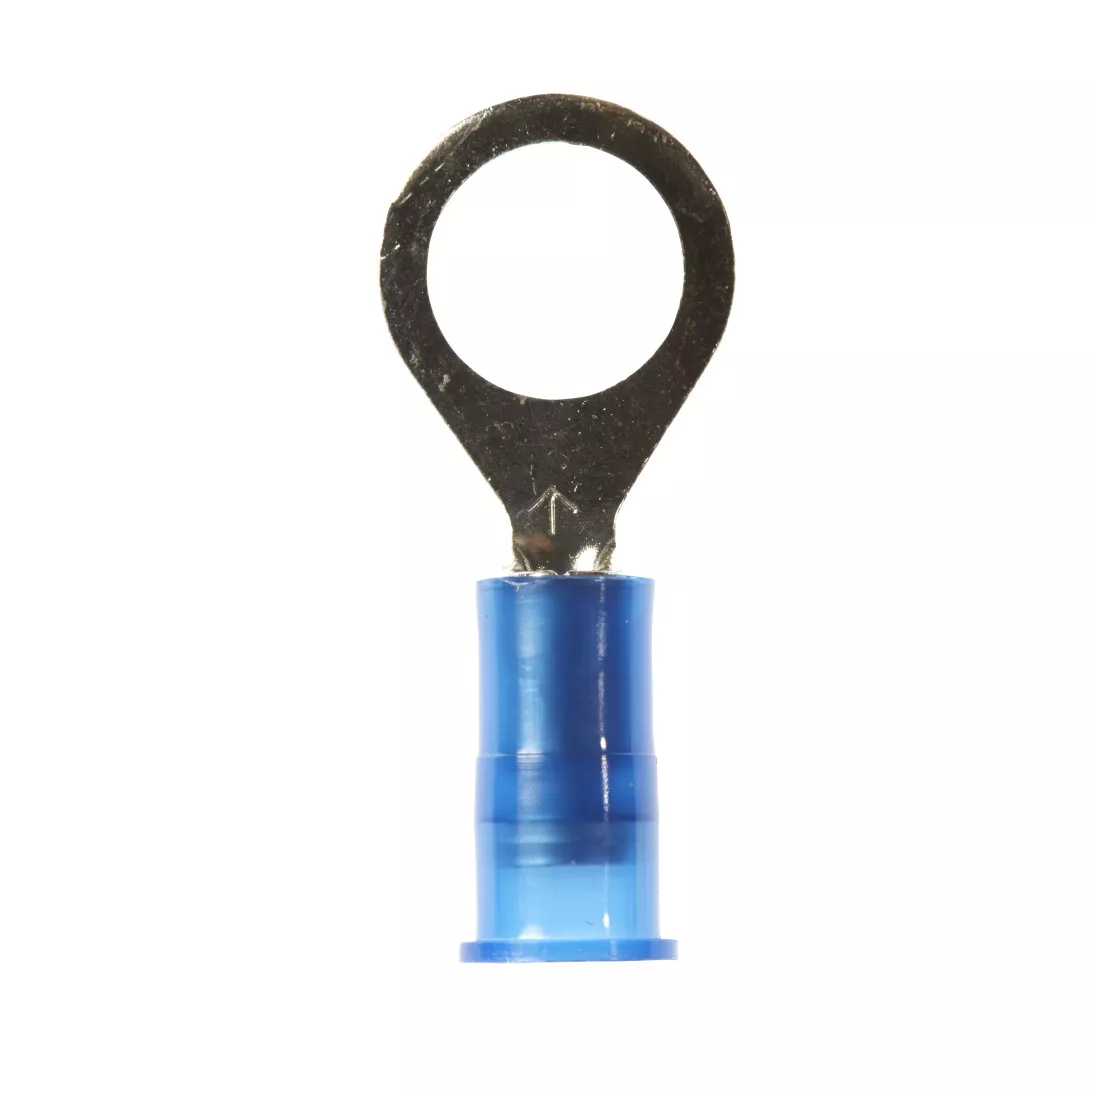 3M™ Scotchlok™ Ring Tongue, Nylon Insulated w/Insulation Grip
MNG14-516R/SK, Stud Size 5/16, 1000/Case